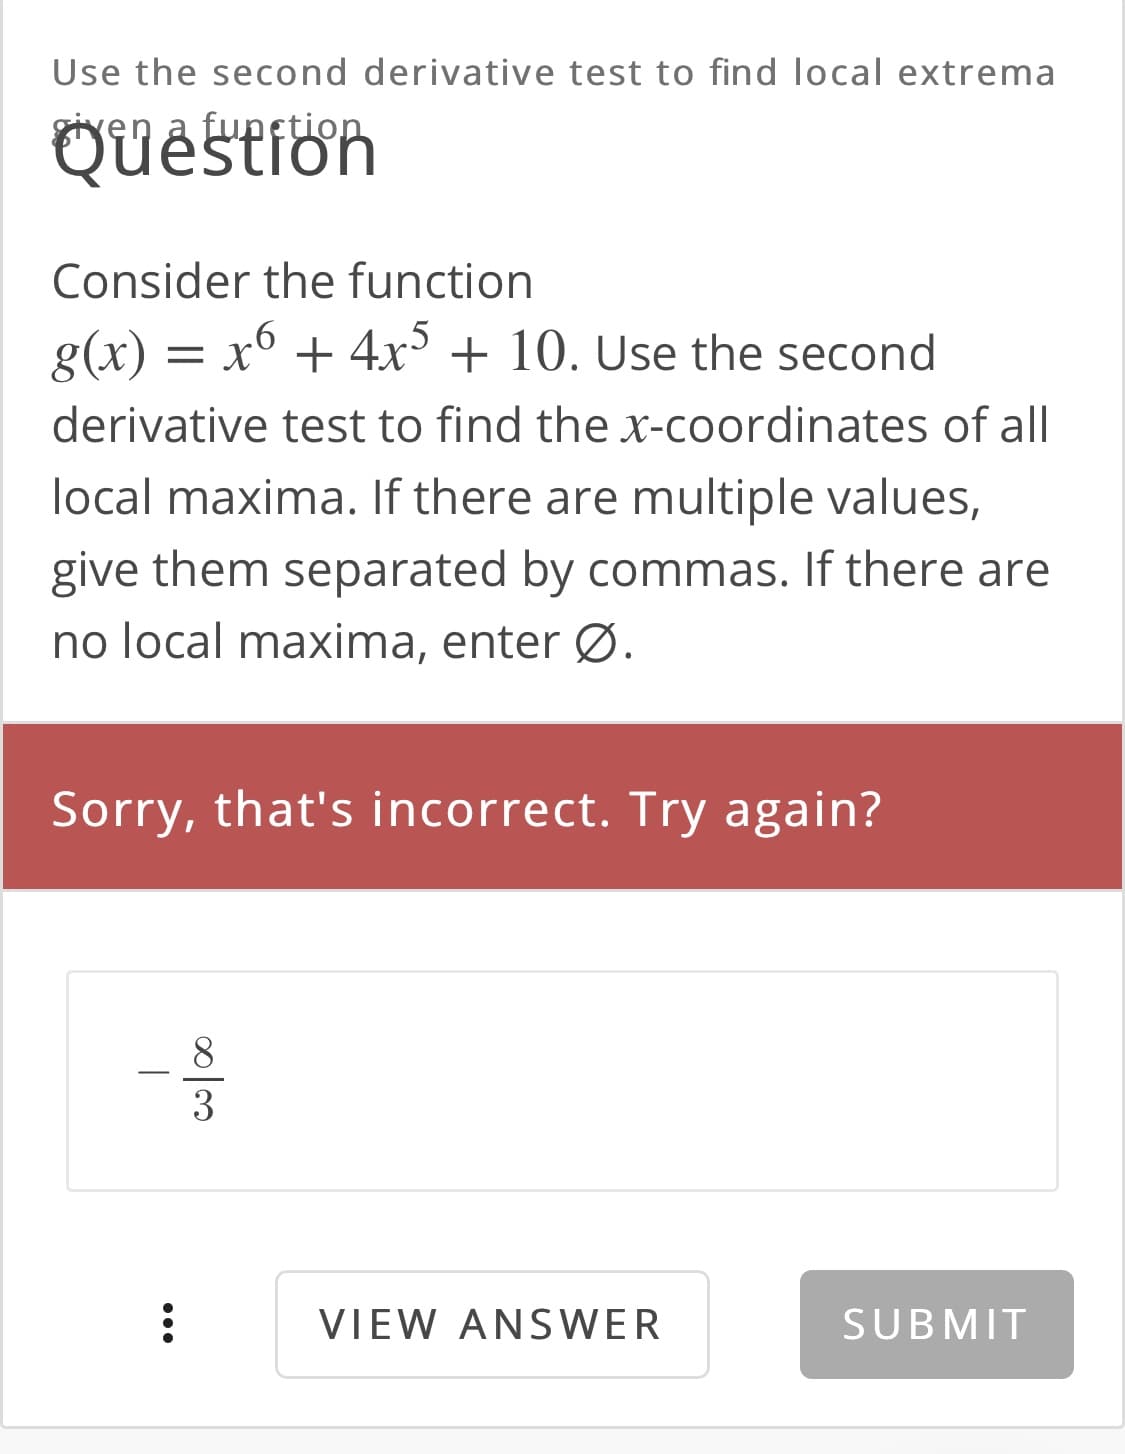 Use the second derivative test to find local extrema
Quêstion
ren
funetic
Consider the function
= x° + 4x° + 10. Use the second
derivative test to find the x-coordinates of all
local maxima. If there are multiple values,
give them separated by commas. If there are
no local maxima, enter Ø.
Sorry, that's incorrect. Try again?
VIEW ANSWER
SUBMIT
